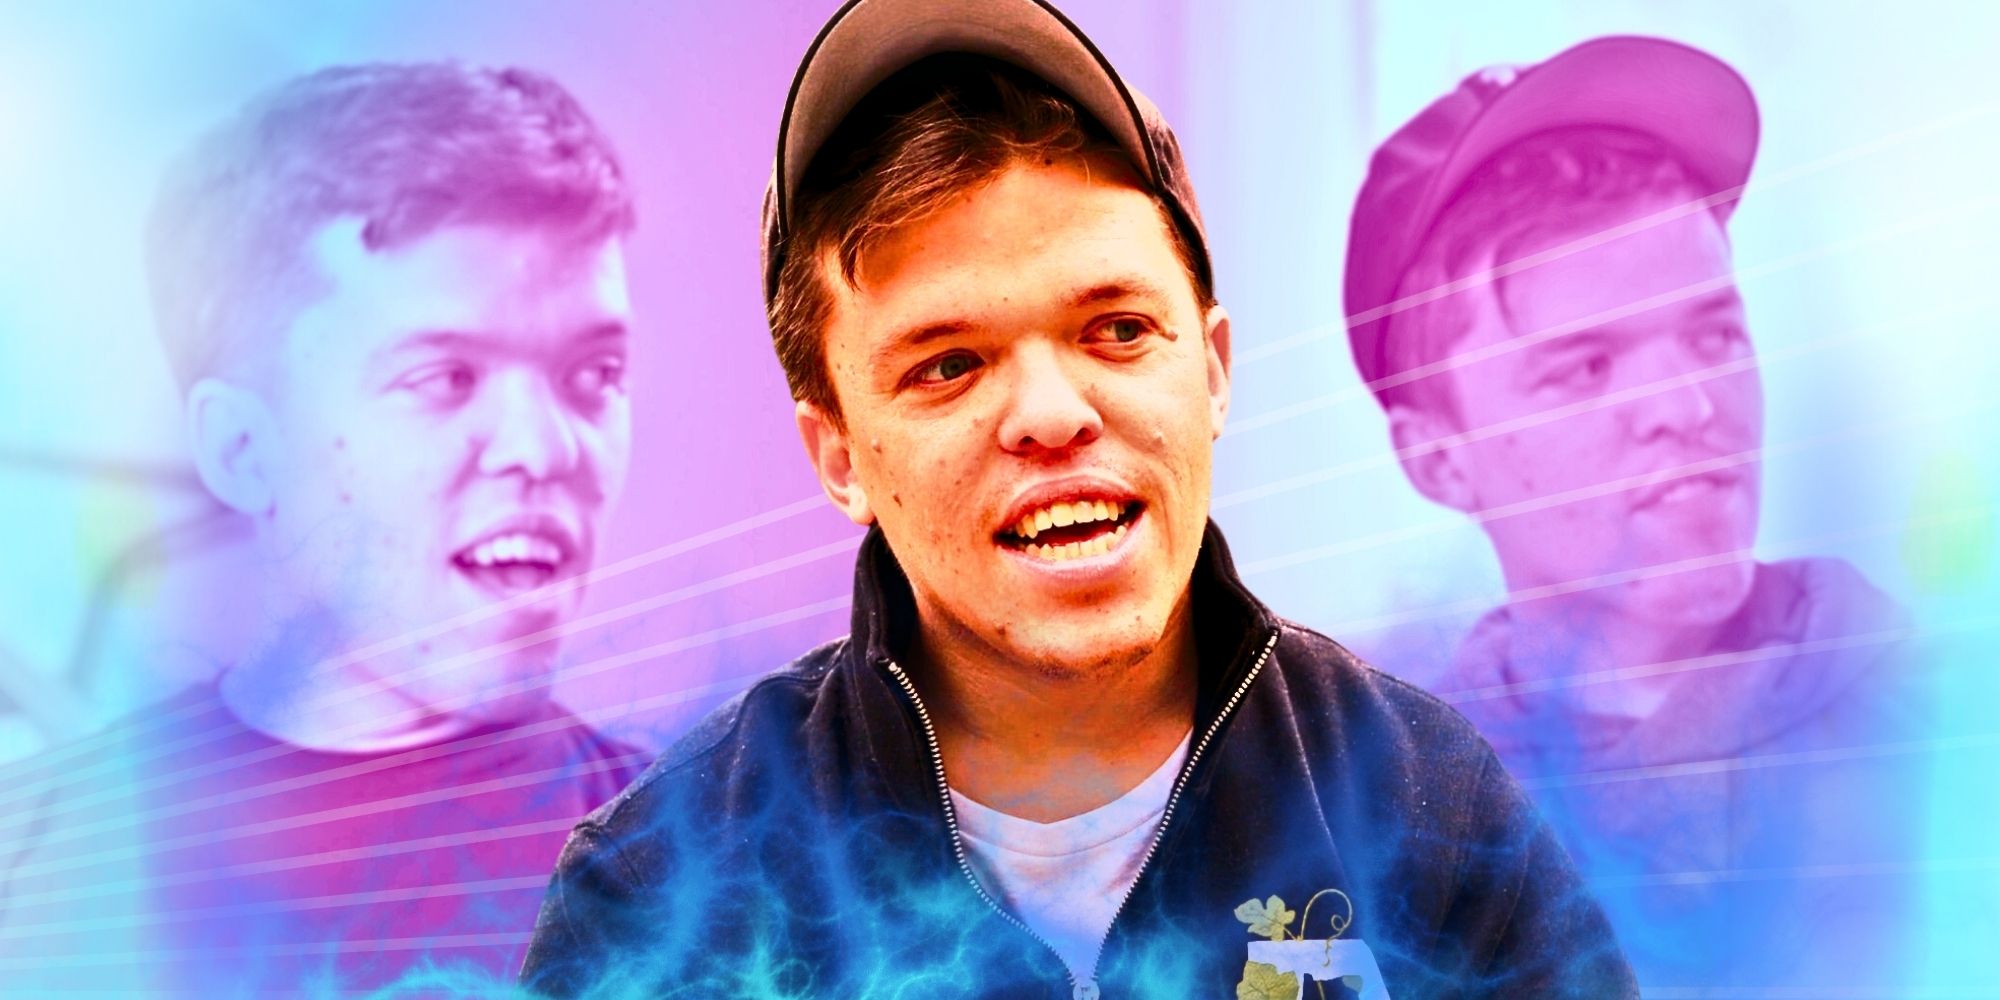 Zach Roloff from Little People, Big World smiling in the center of two other photos of him speaking